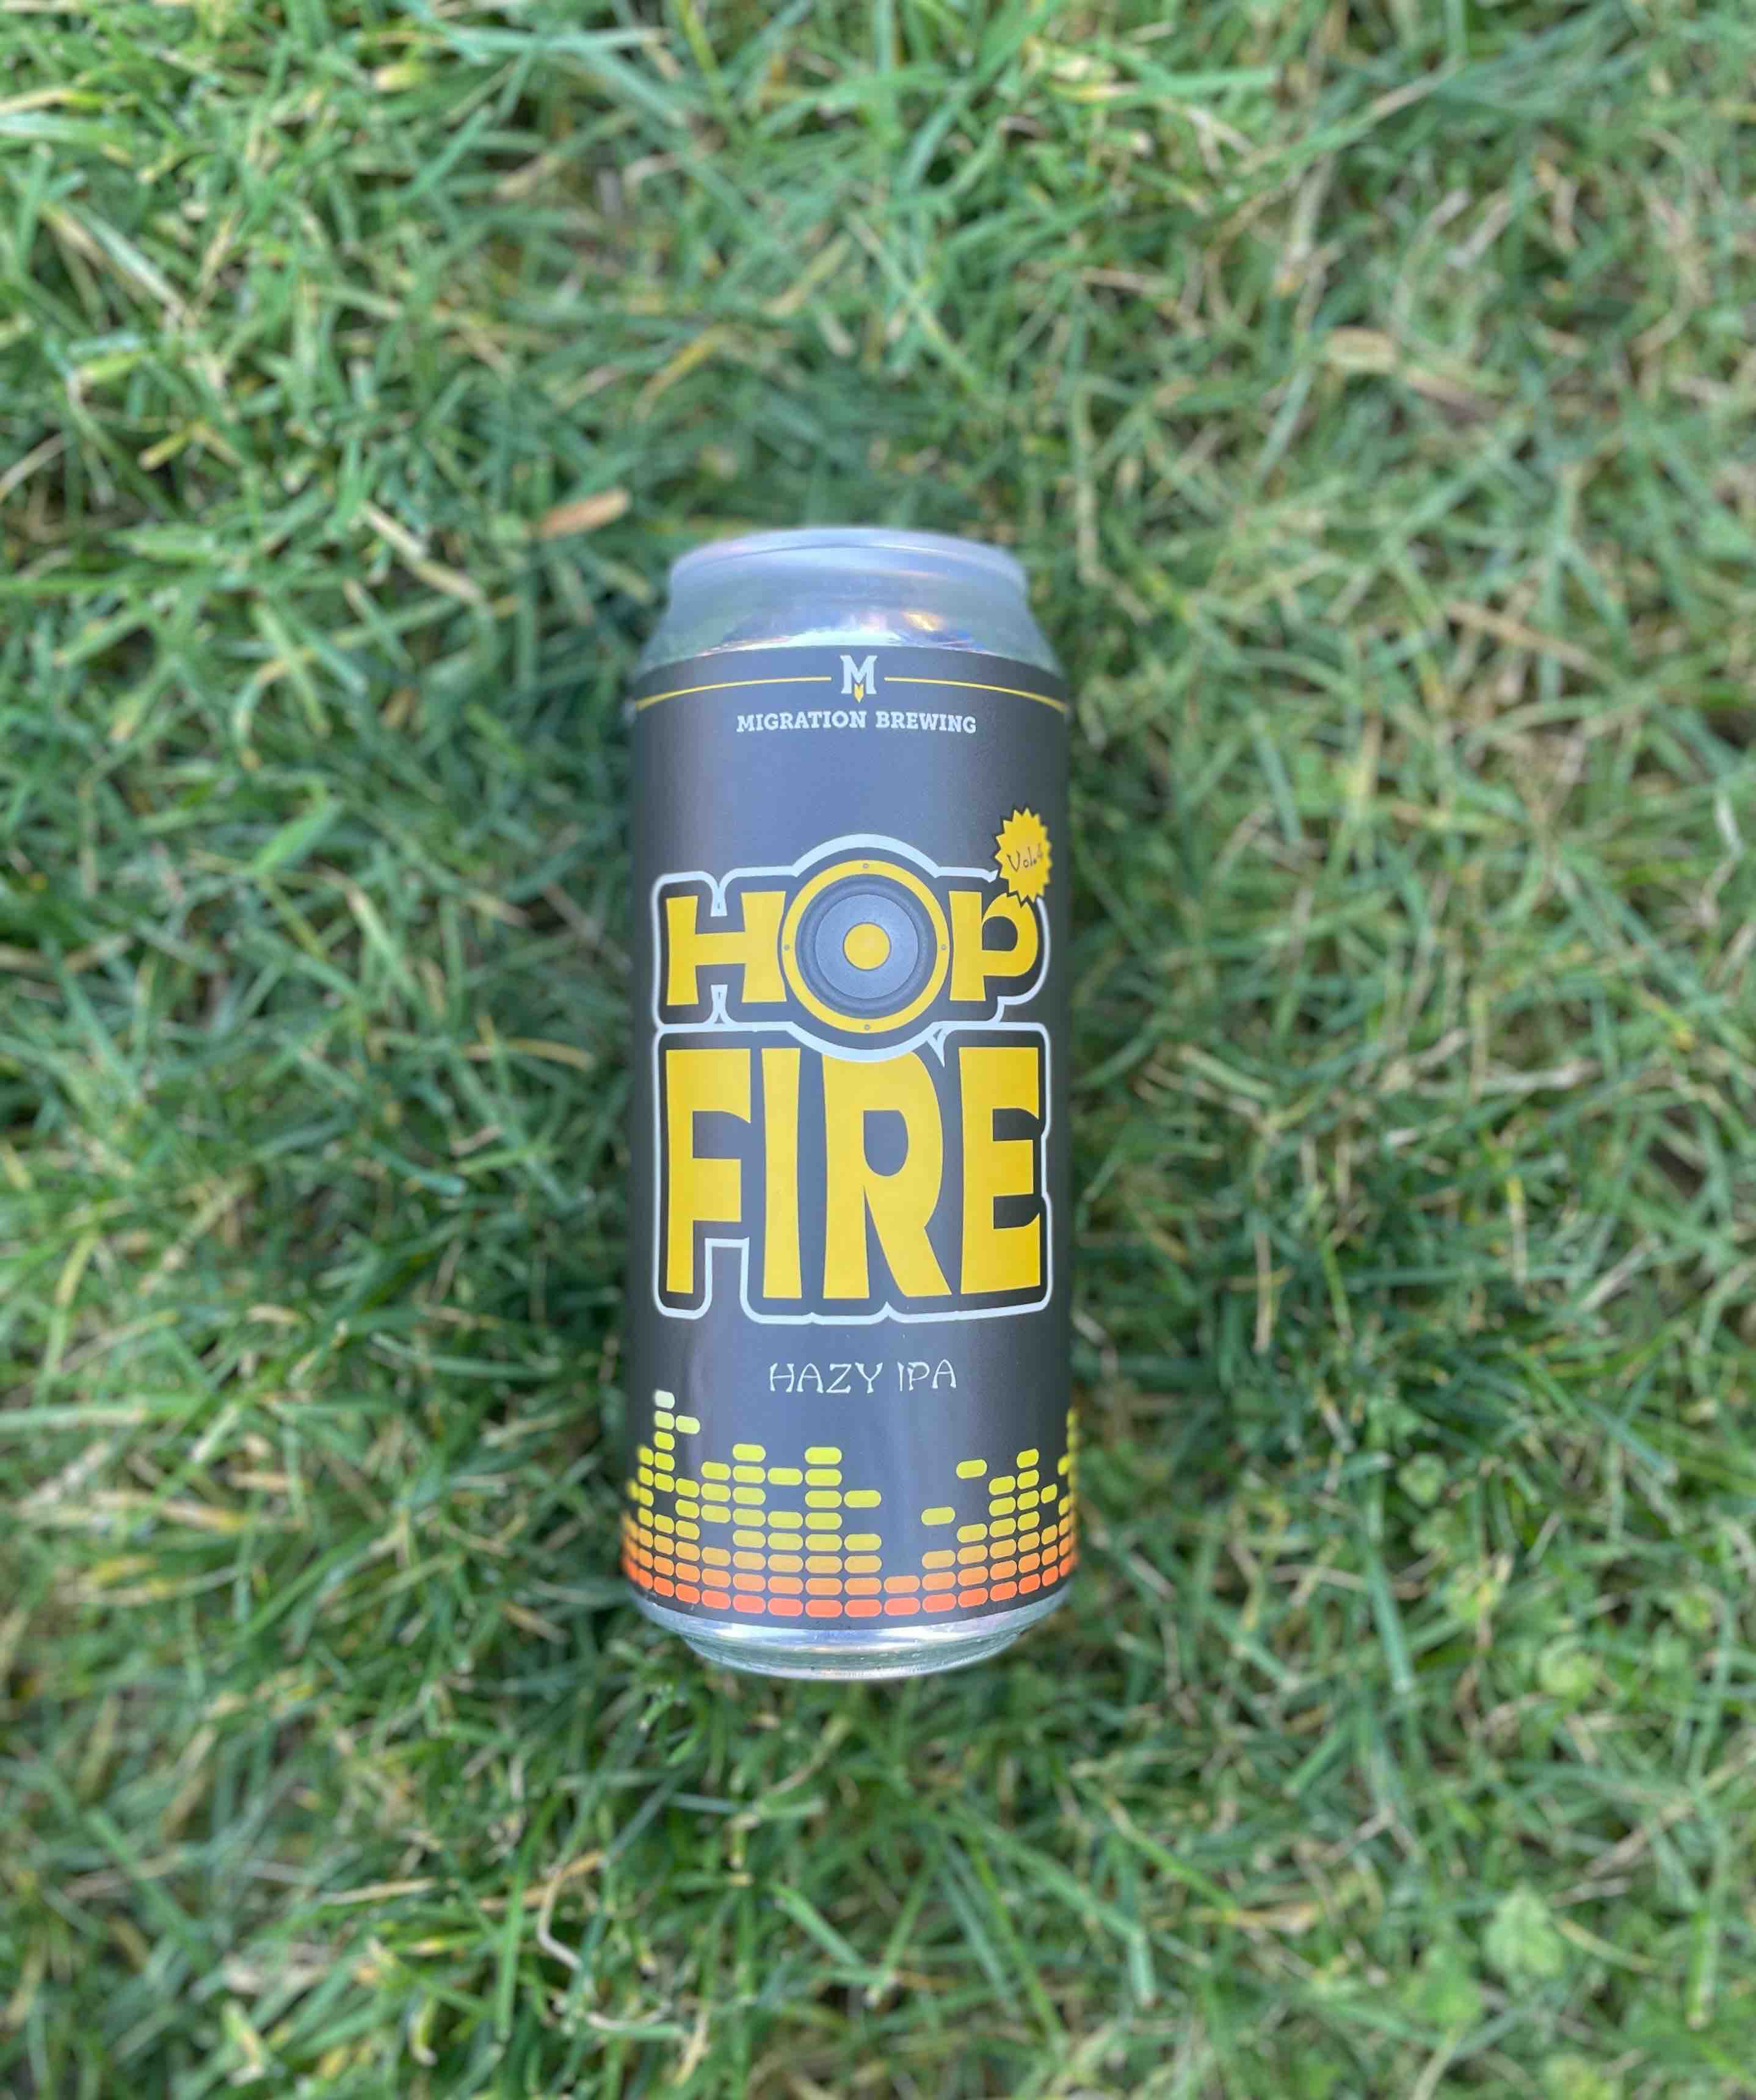 image of Hop Fire Vol. 4 courtesy of Migration Brewing